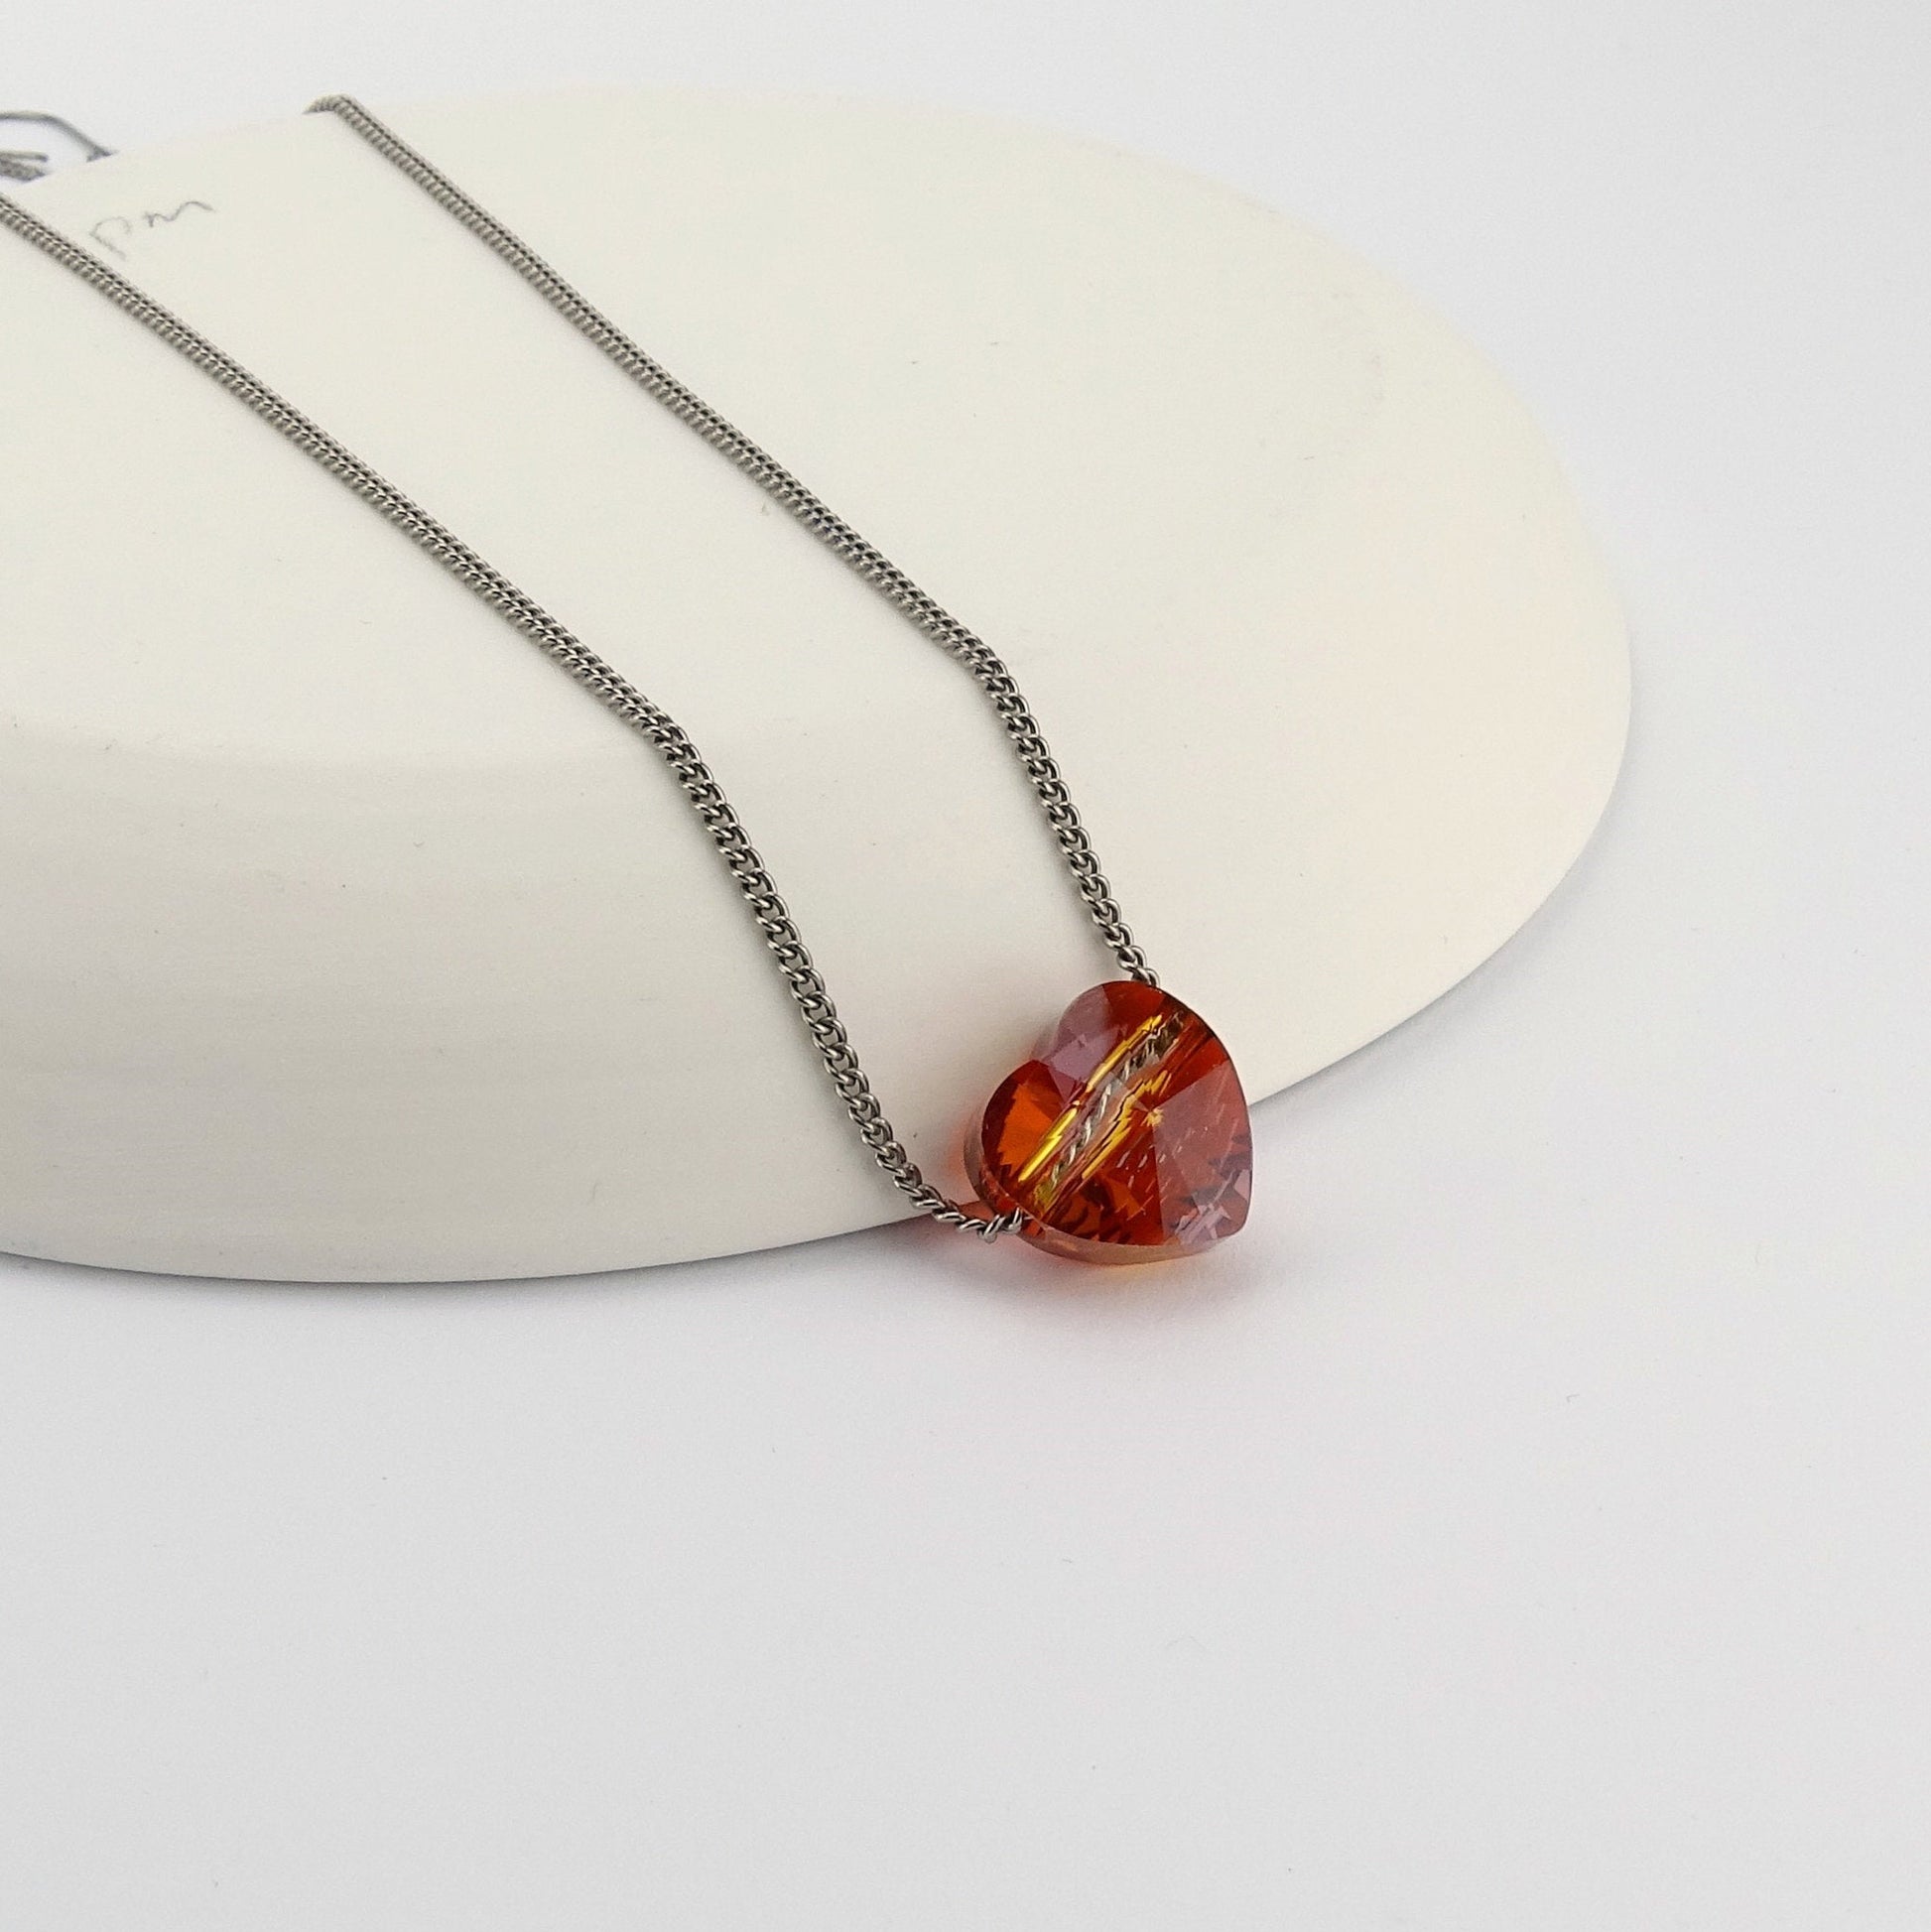 Red Magma Heart Titanium Necklace, Floating Heart Swarovski Crystal, Hypoallergenic Nickel Free Pure Titanium Necklace For Sensitive Skin